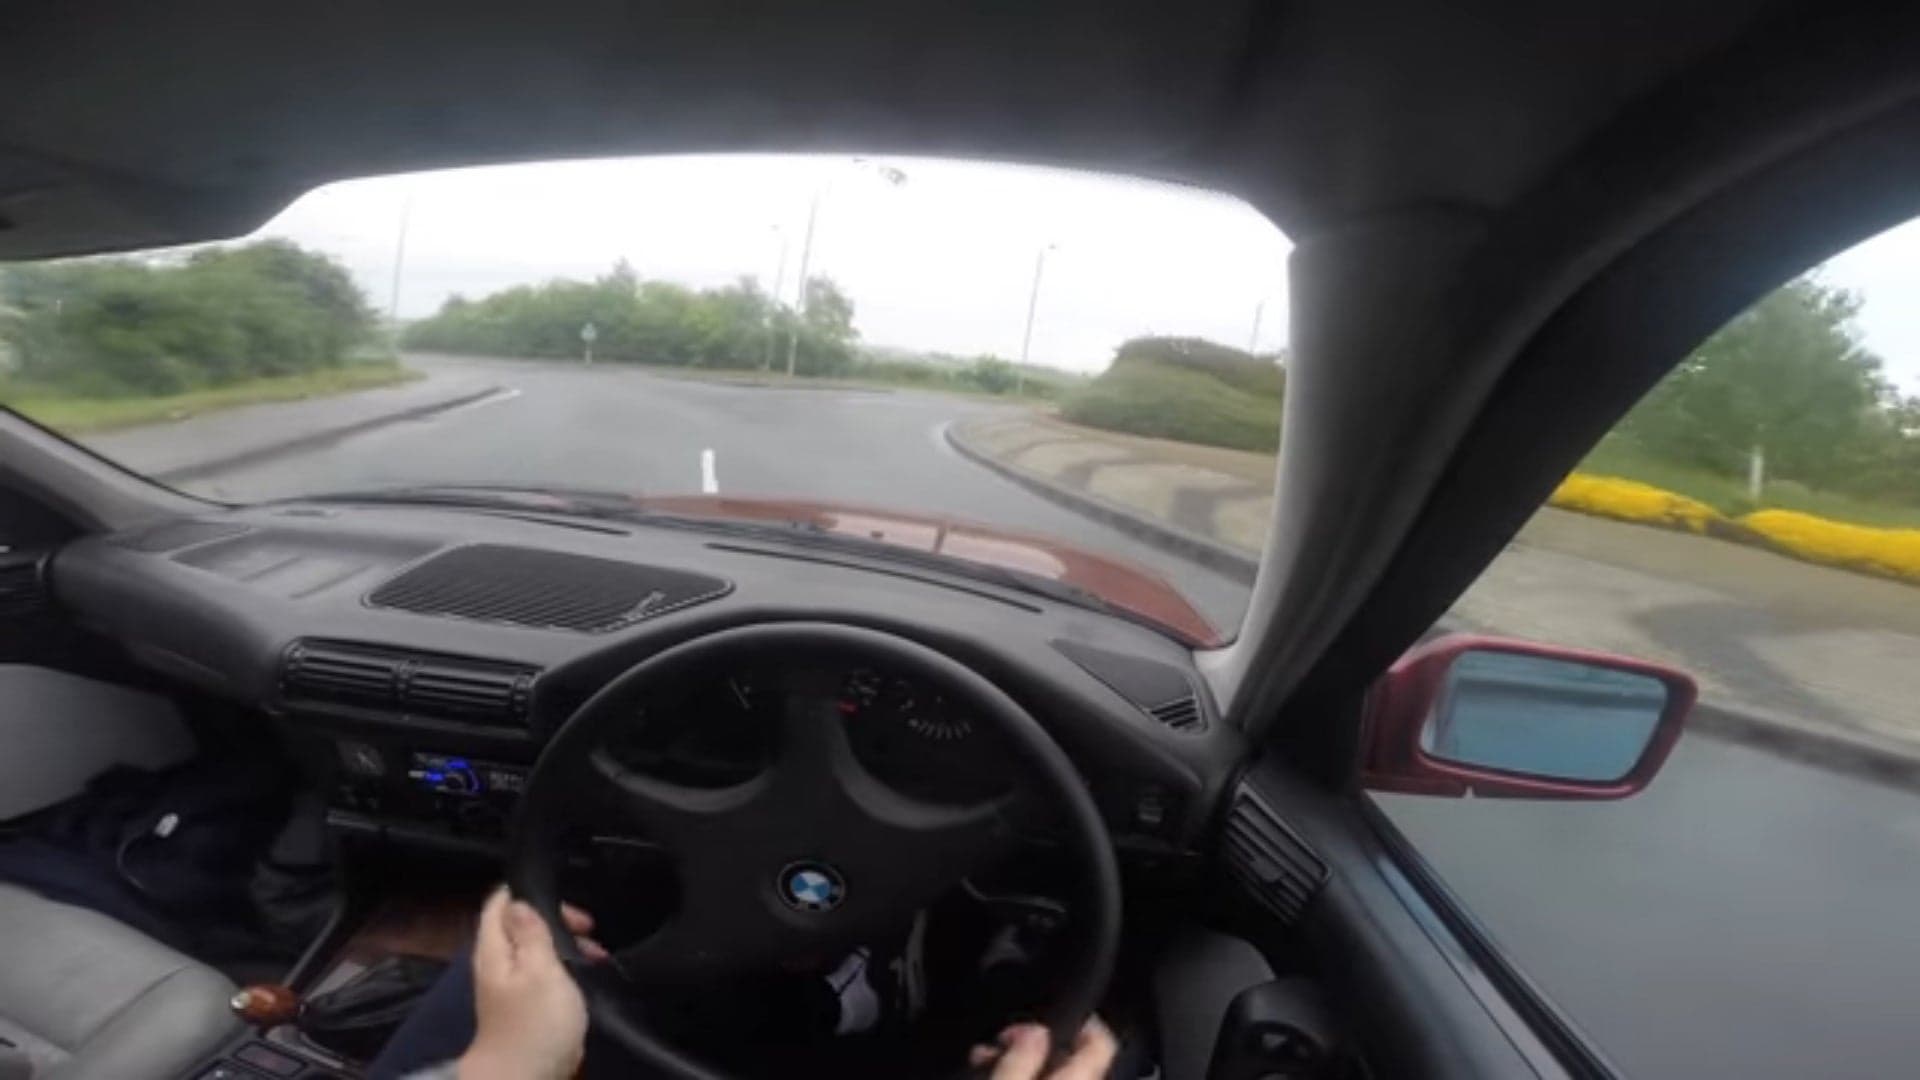 Watch This BMW 5 Series Get Busted While Drifting a Roundabout